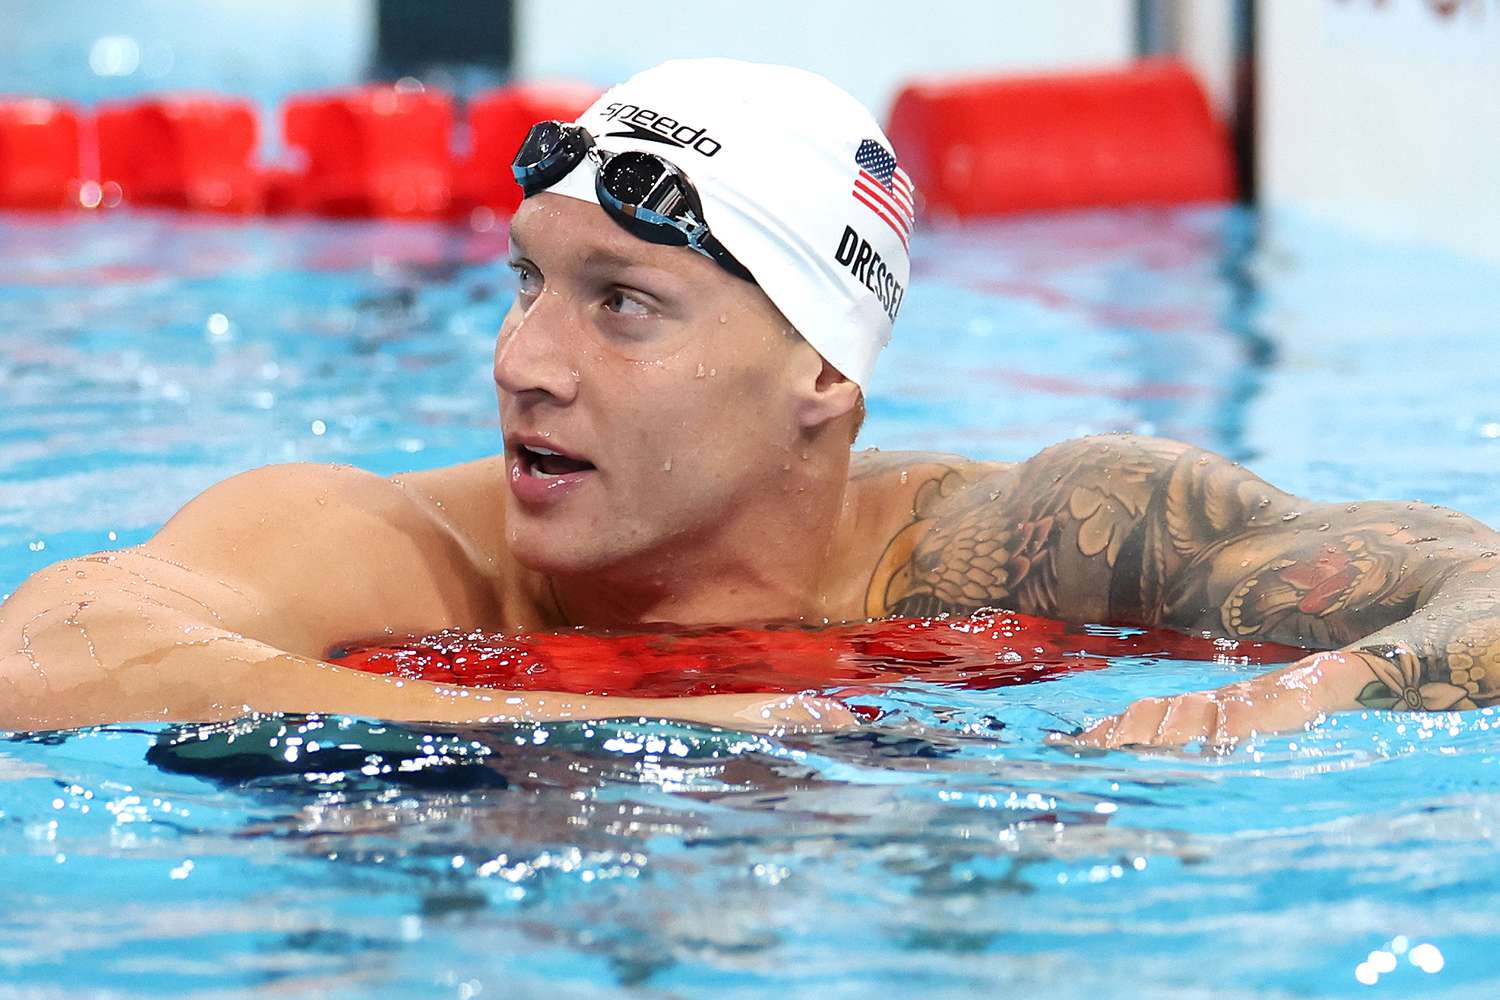 Caeleb Dressel Admits It 'Hasn’t Been My Best Week' After He Misses Medal in 50-Meter Freestyle: 'Tough Day at the Office'